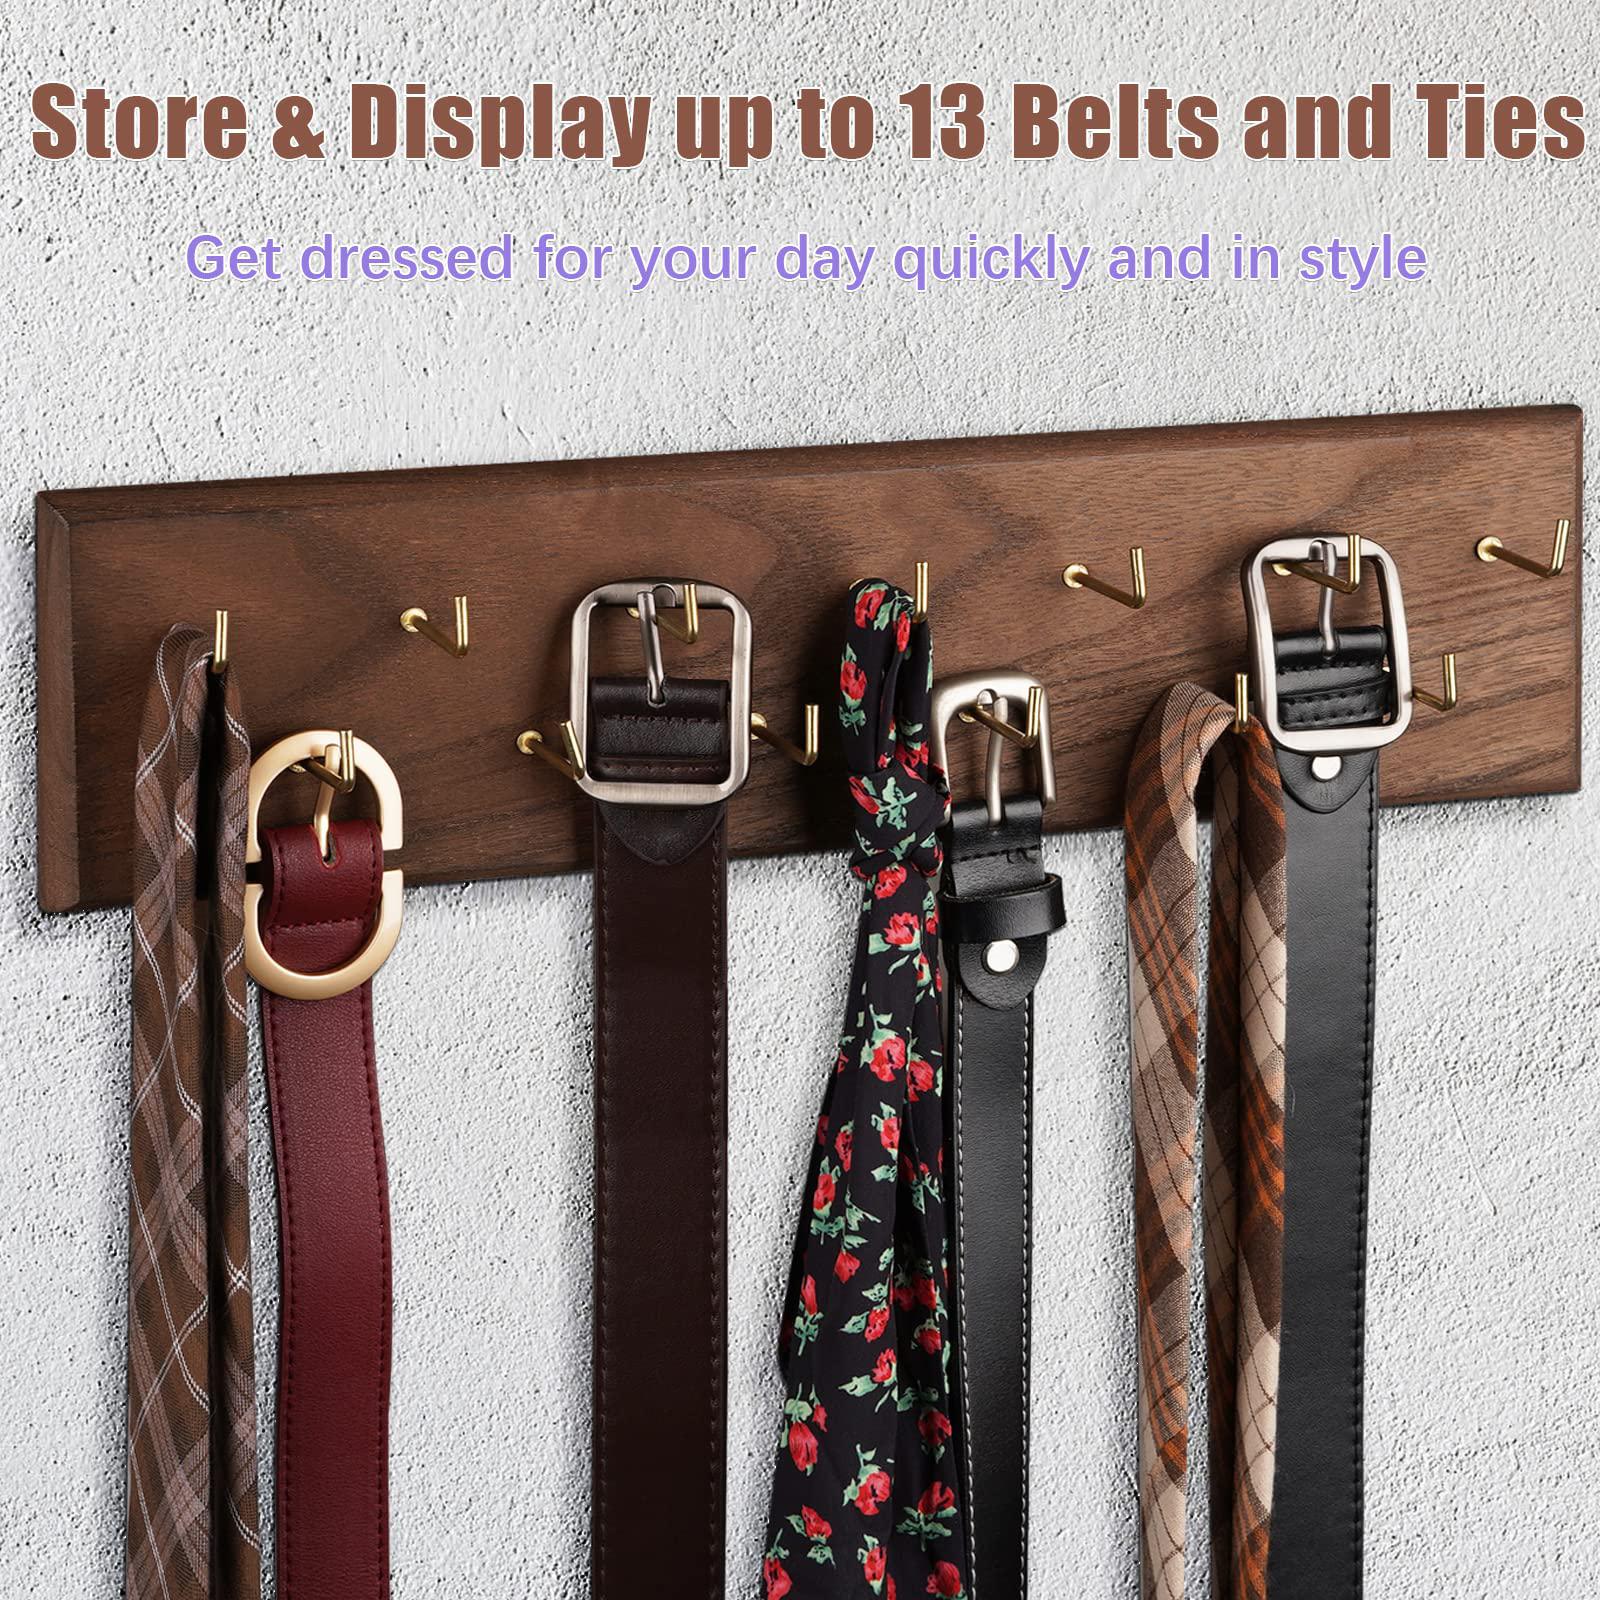 creproly belt hanger wall mount belt organizer for closet, holds over 28 belts wooden wall mounted belt rack storage tie and 